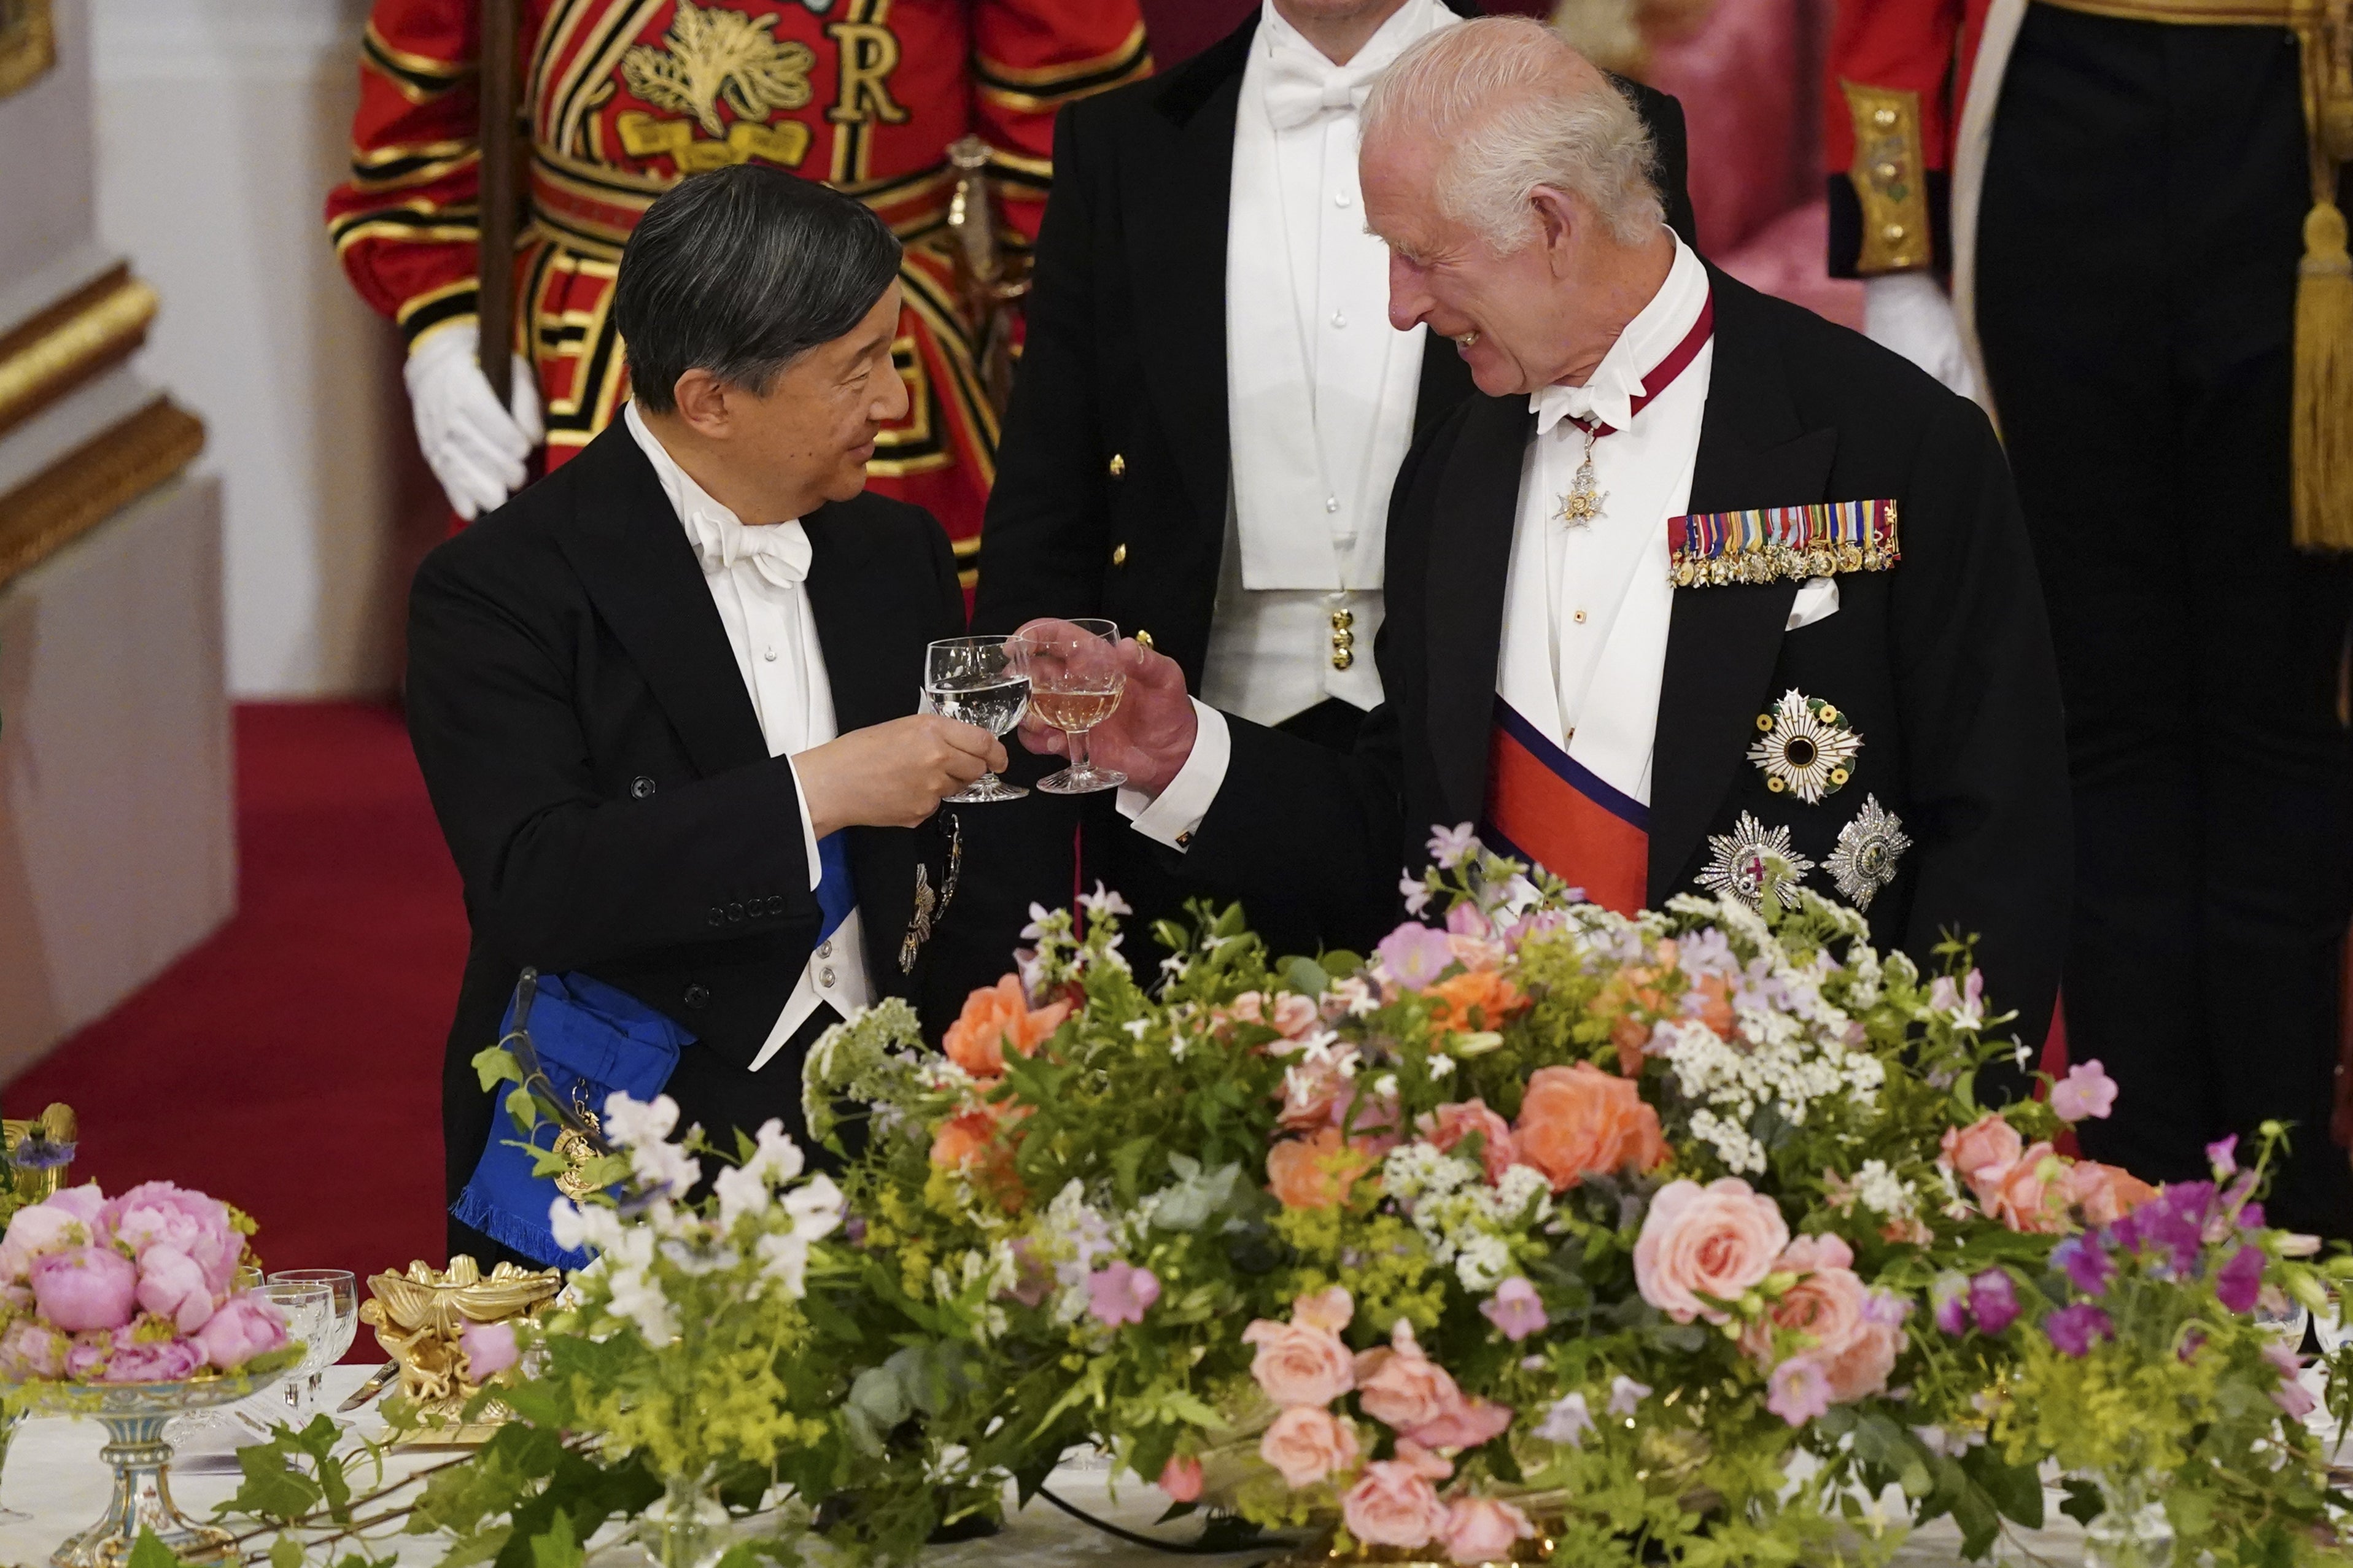 The King and Emperor Naruhito of Japan share a toast during the state banquet (Jordan Pettitt/PA)